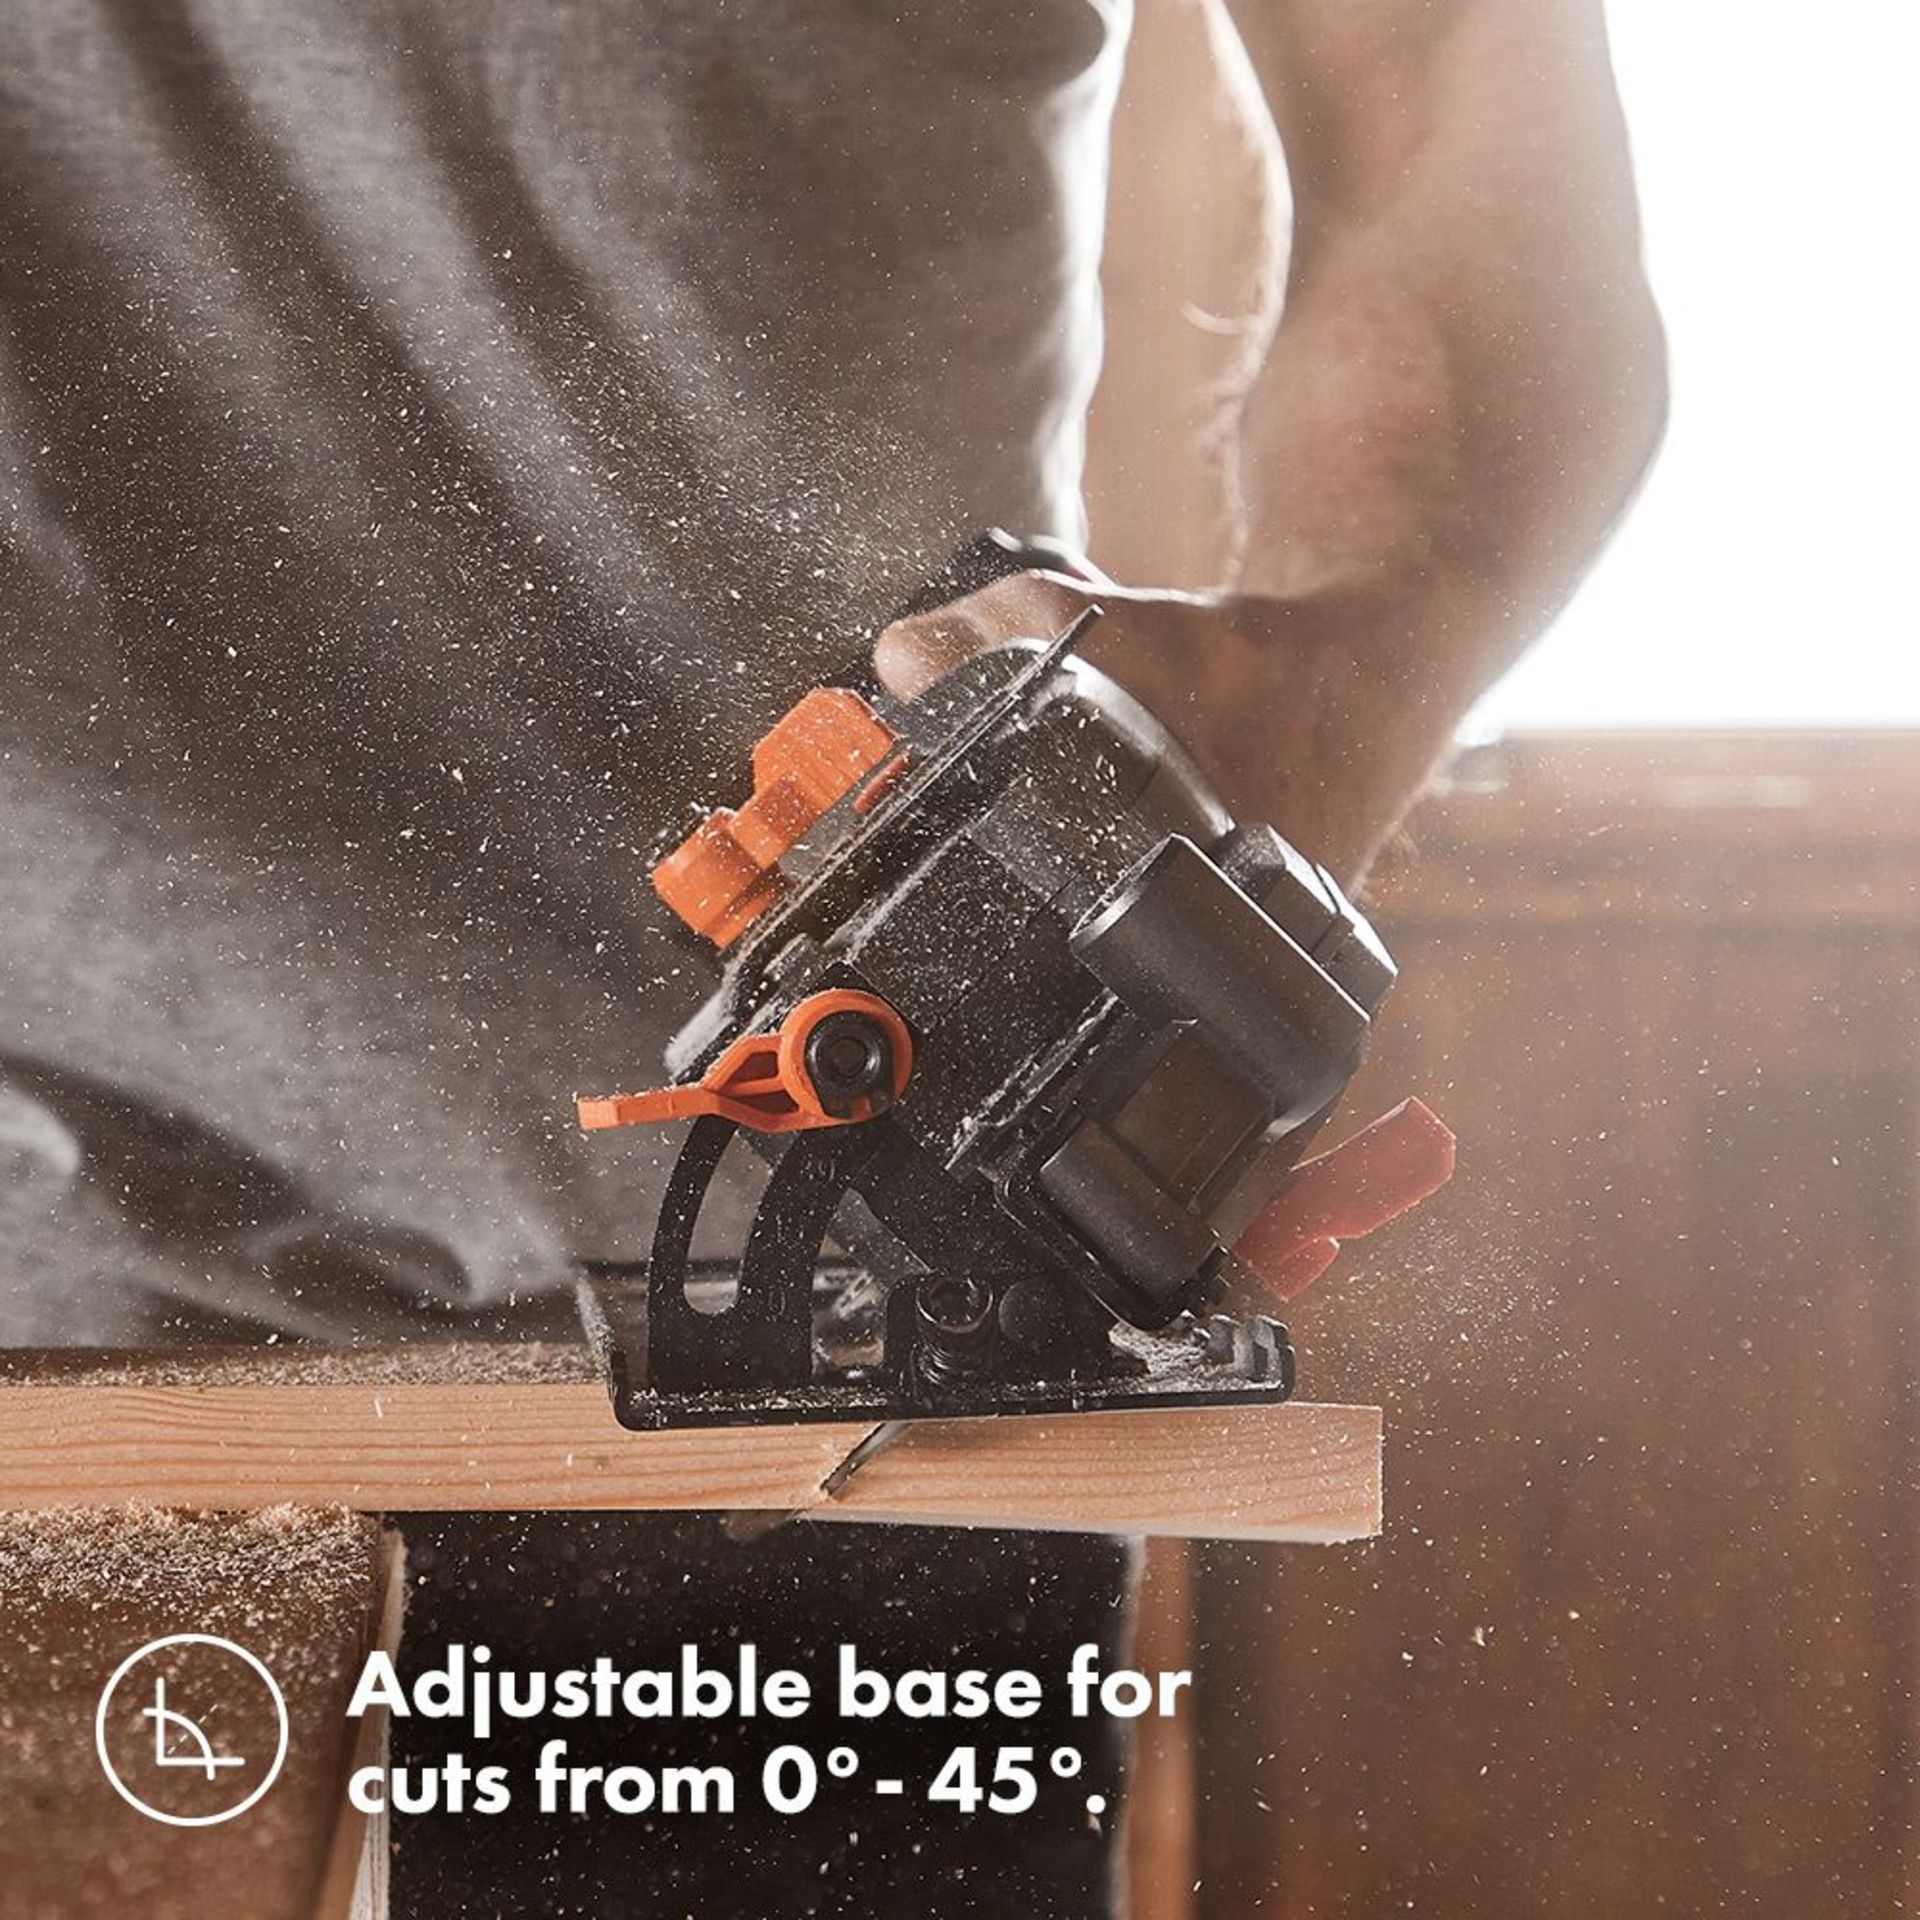 (K20) E-Series Cordless Circular Saw Make bevel angle cuts and joint cuts in MDF, hardwood a... - Image 2 of 3